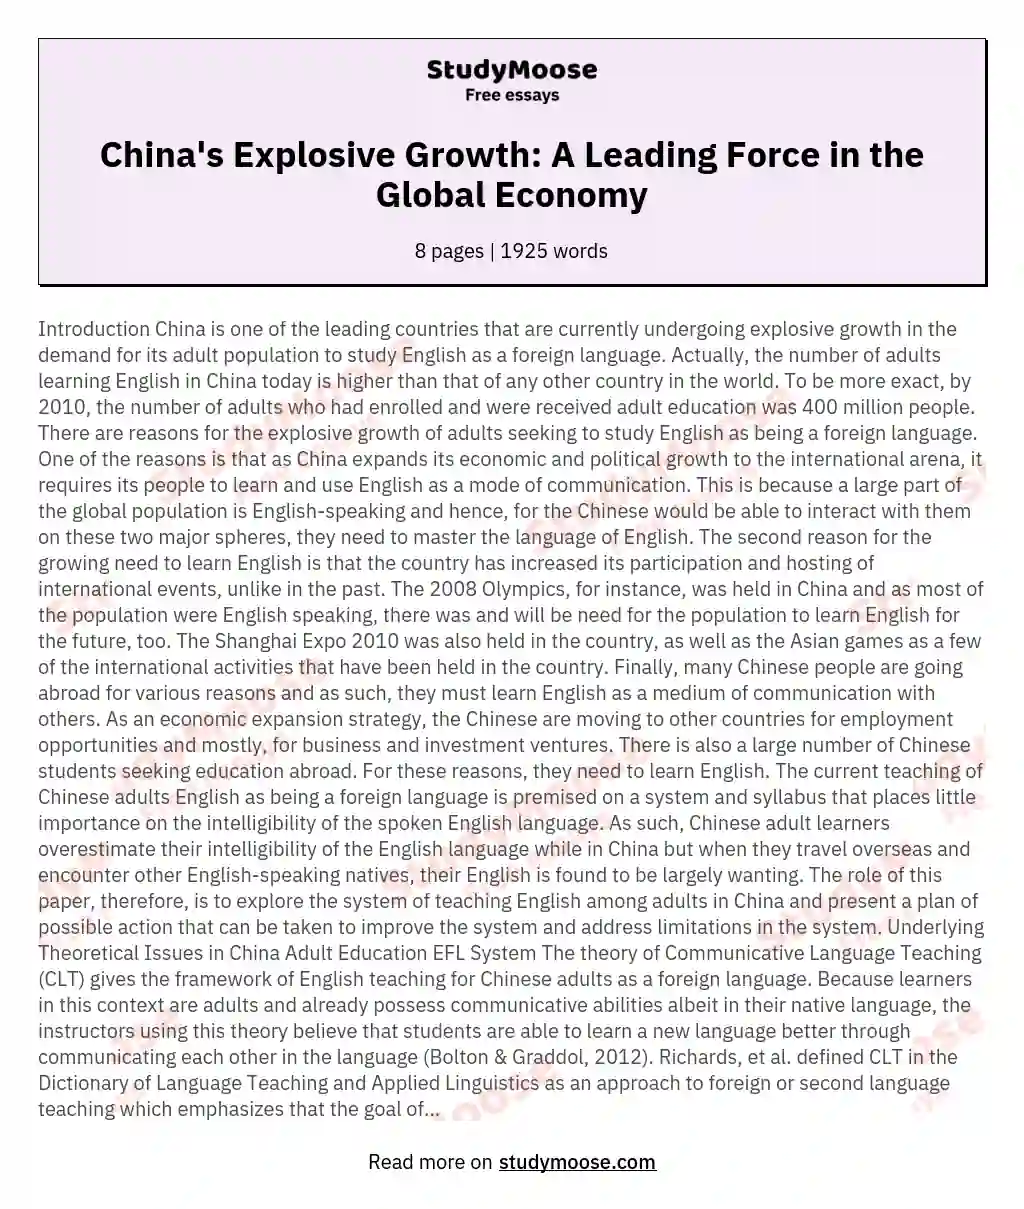 China's Explosive Growth: A Leading Force in the Global Economy essay